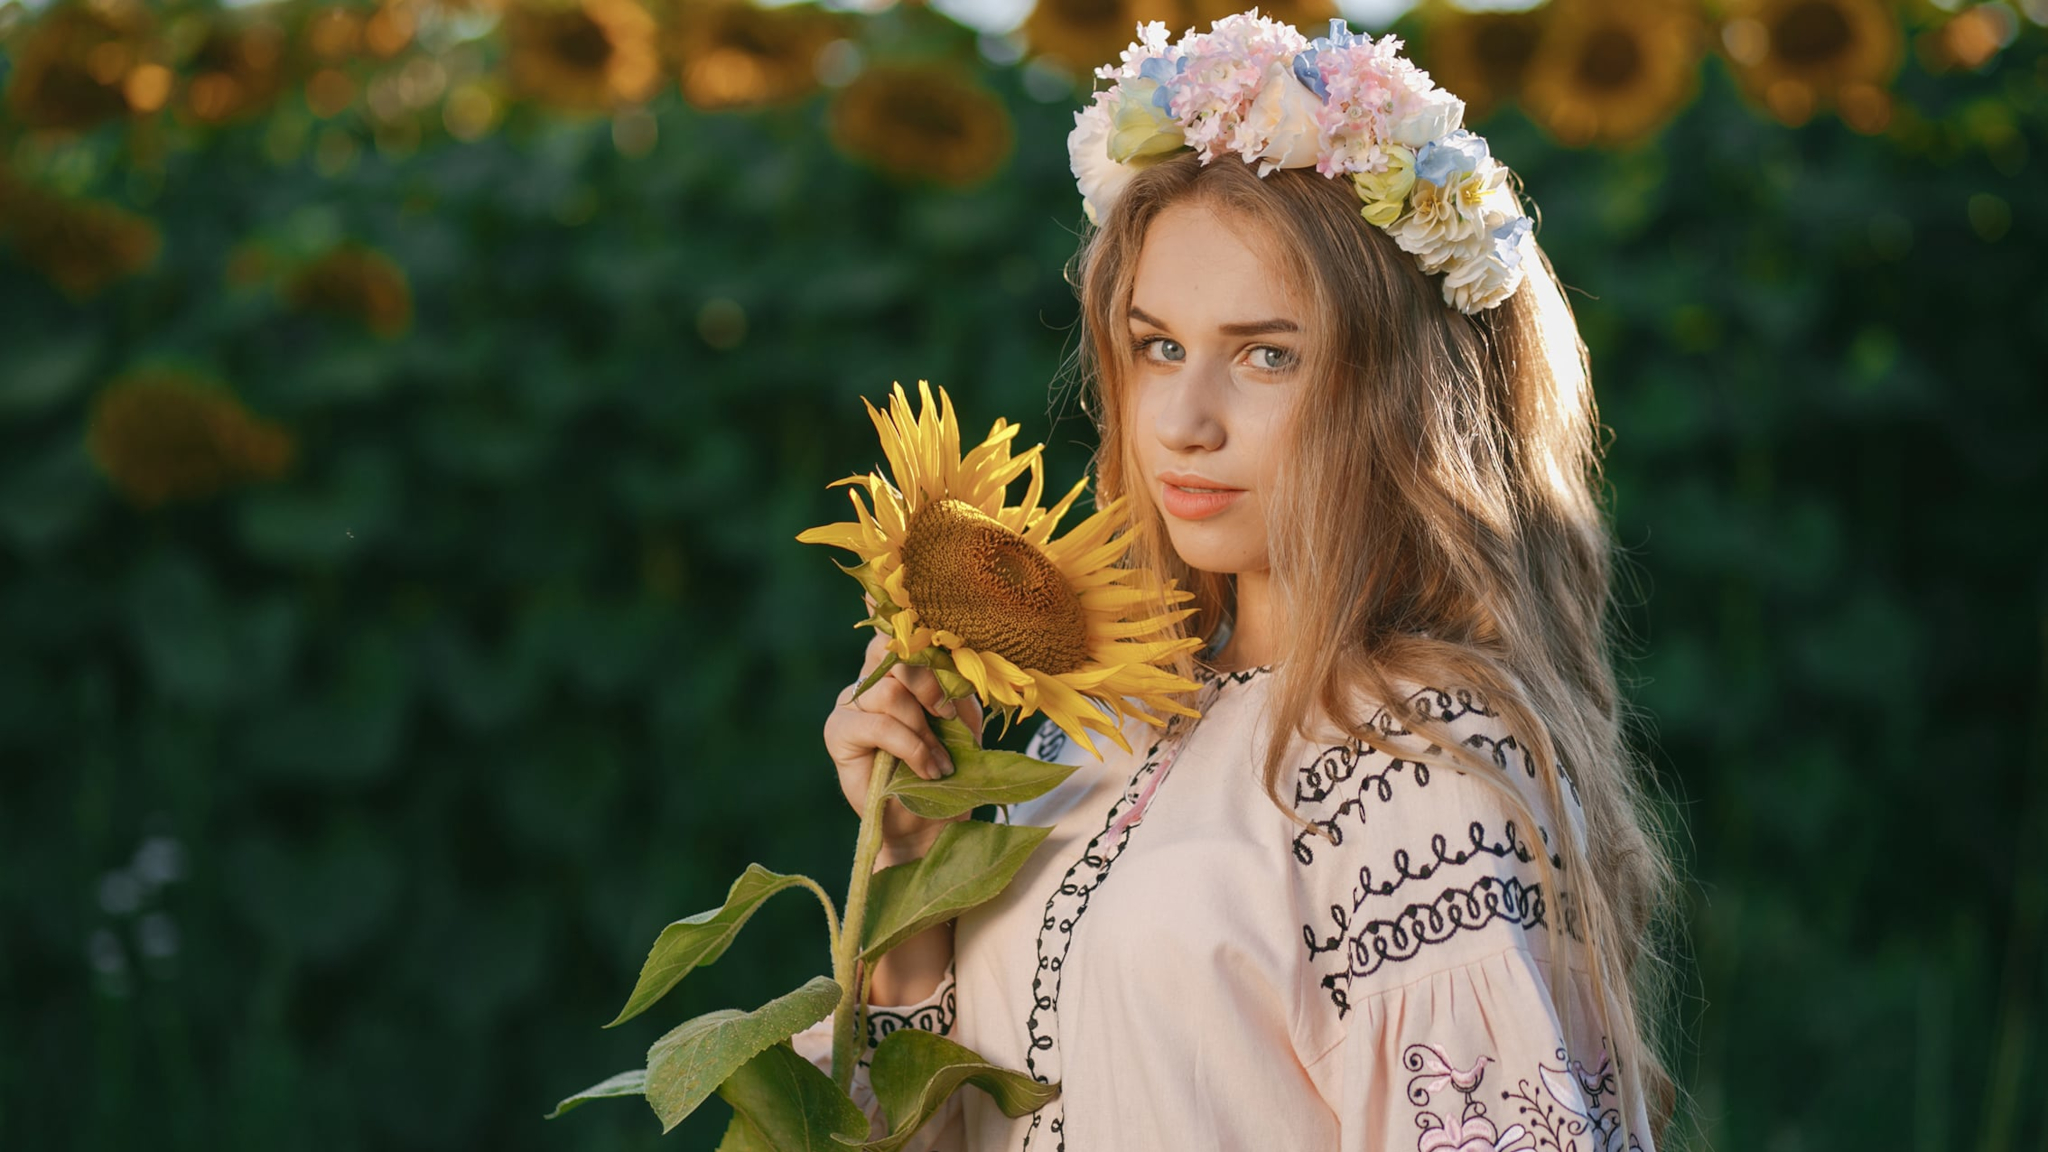 Women Ukrainian Blonde Sunflowers Traditional Clothing Women Outdoors Flower In Hair Looking At View 2048x1152